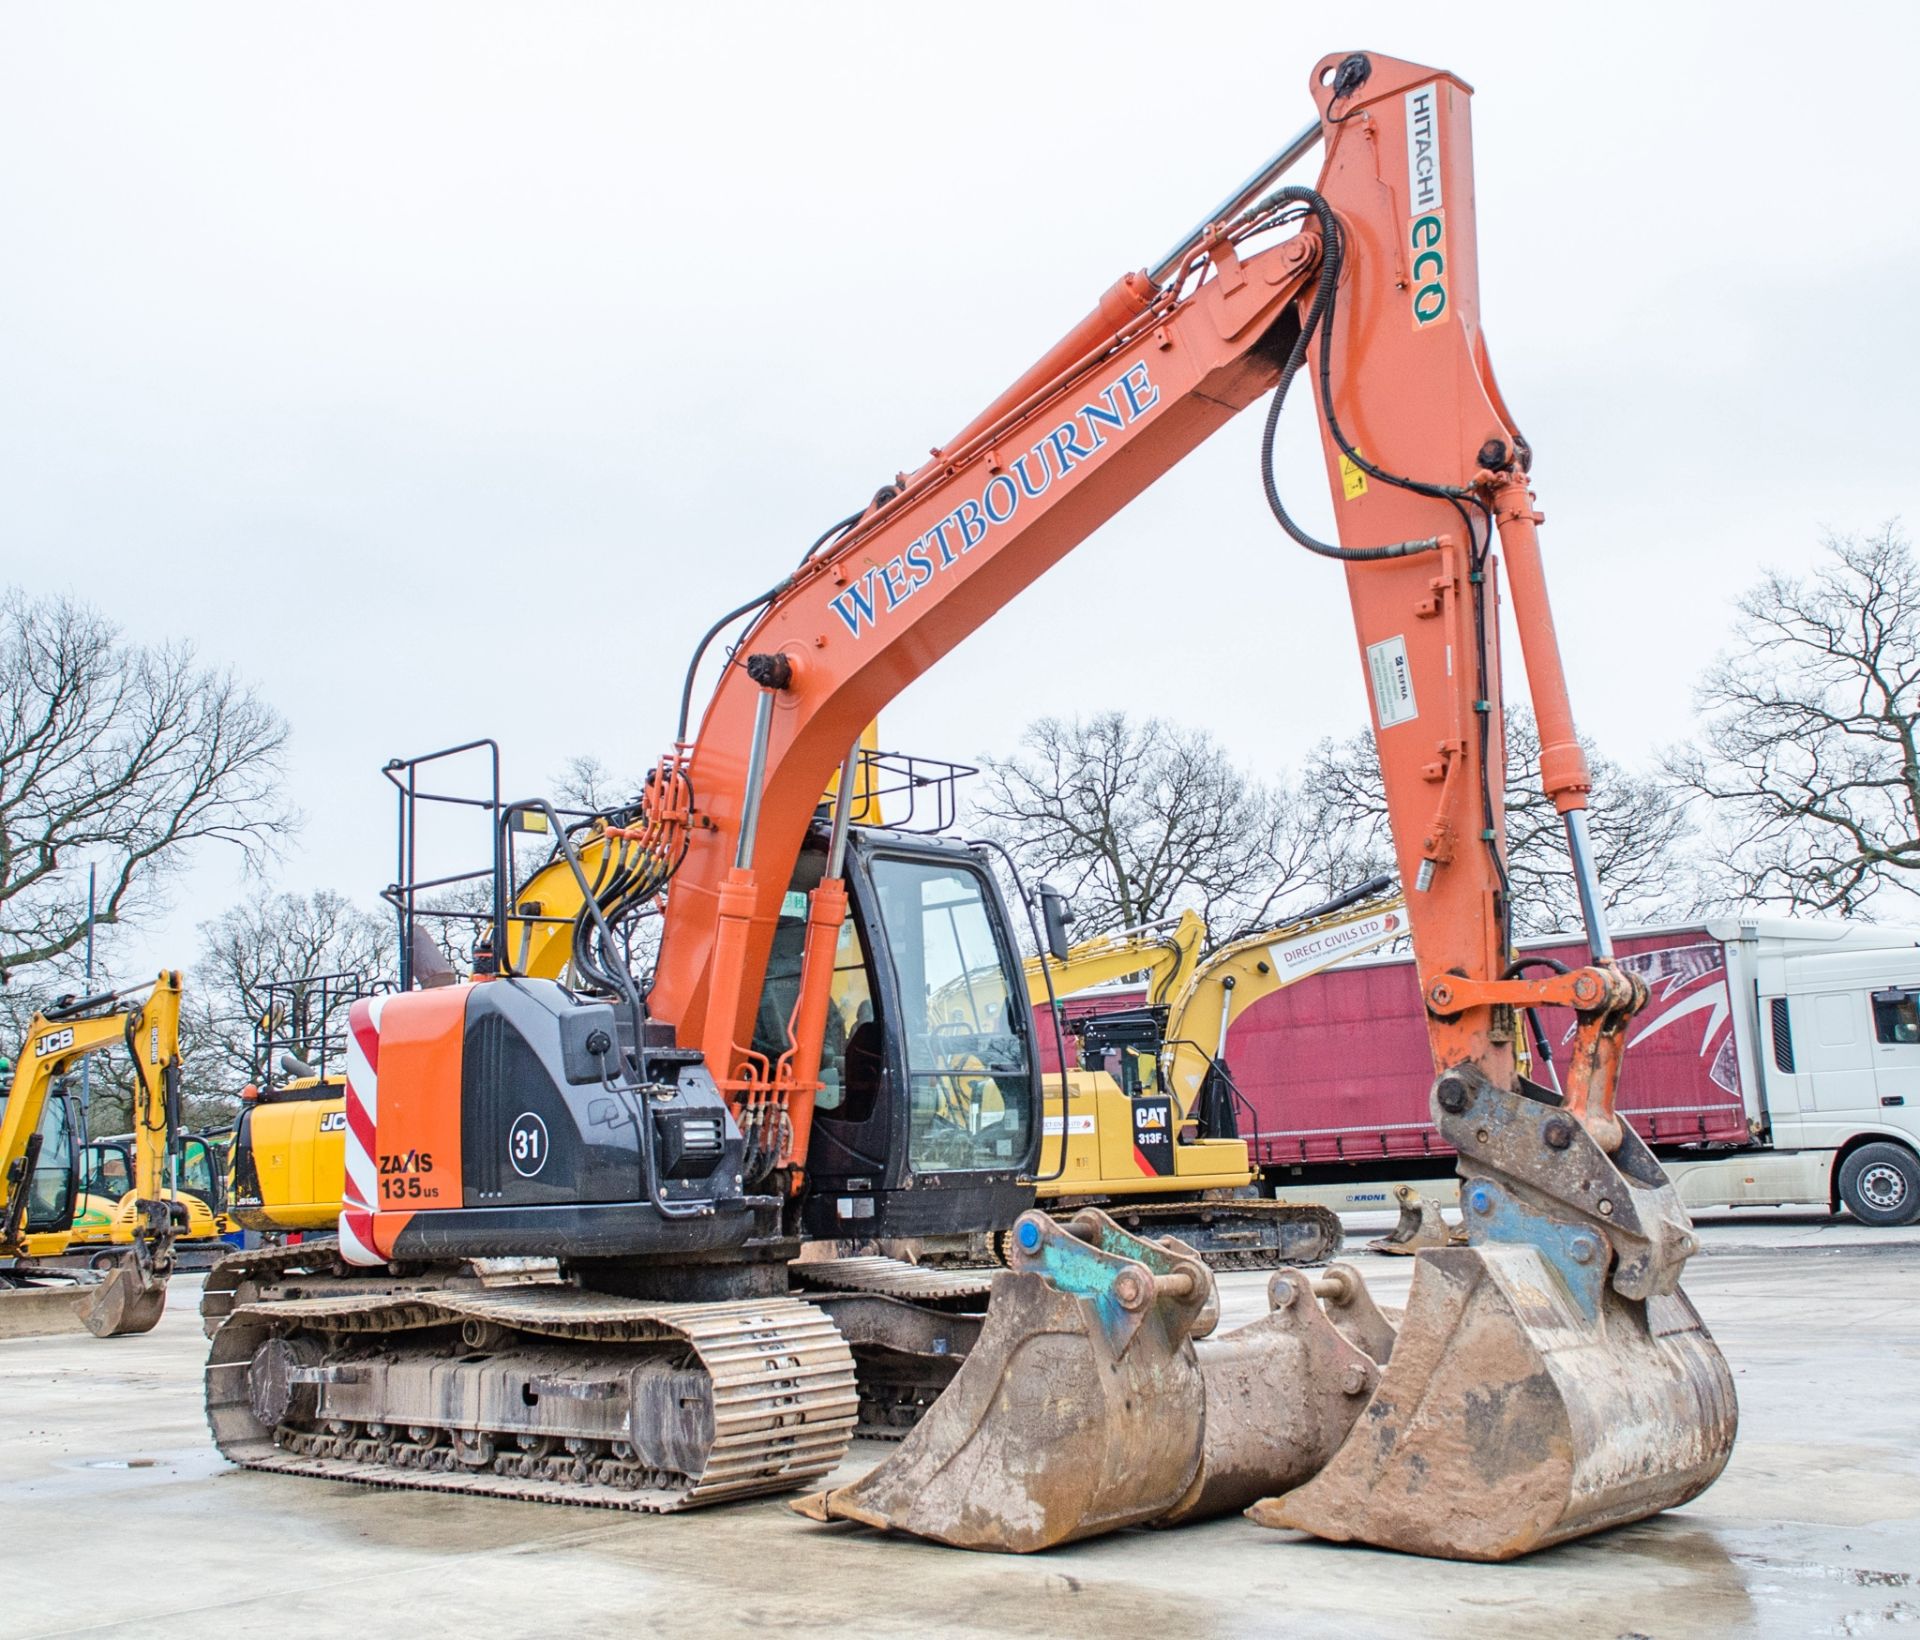 Hitachi ZX 135 US-5B 14.5 tonne steel tracked excavator Year: 2014 S/N: 92769 Recorded hours: 8350 - Image 2 of 25